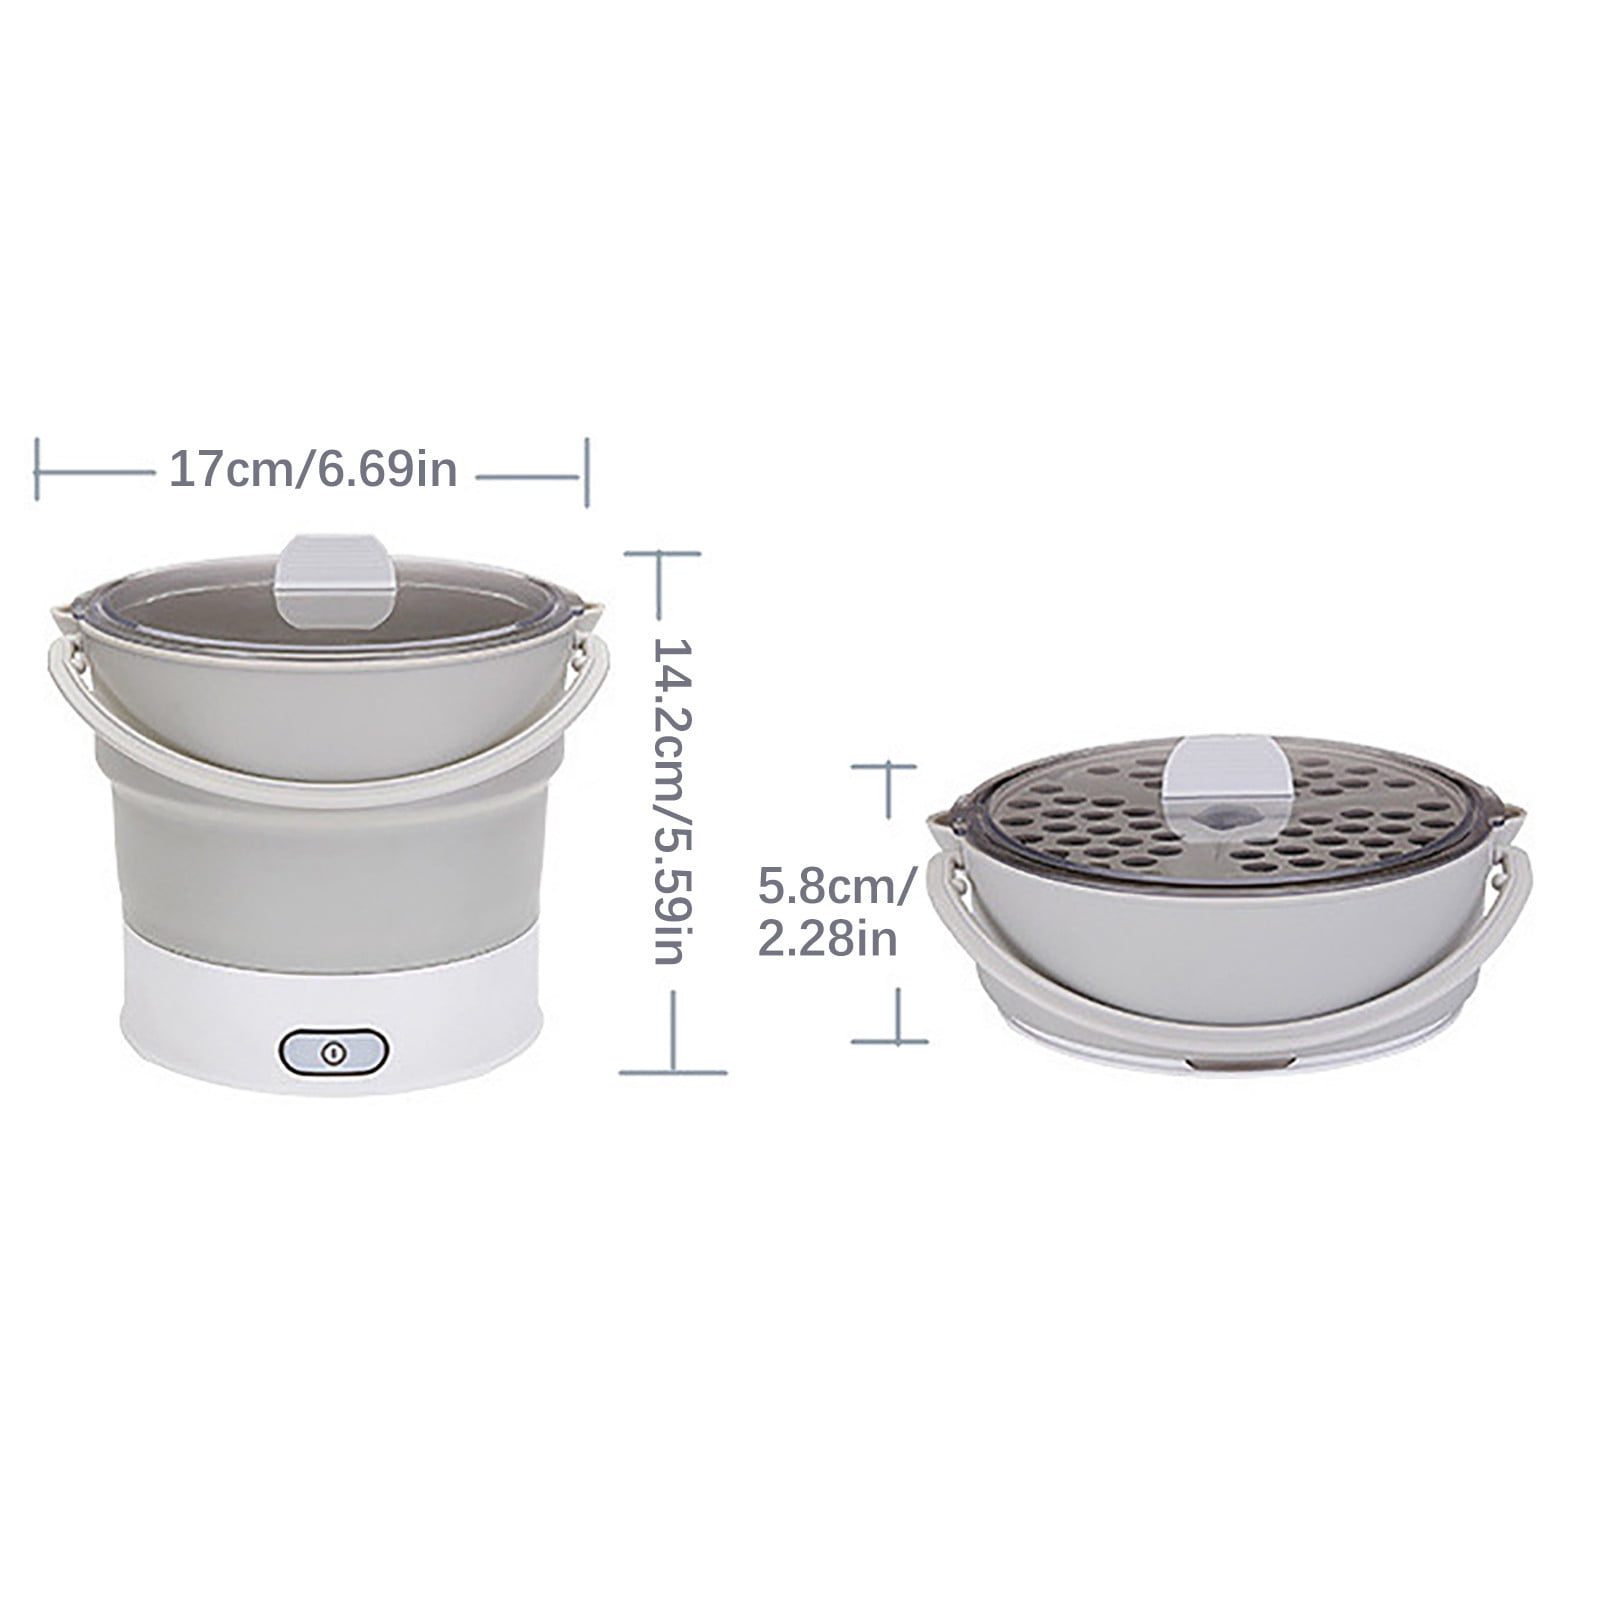 Drizzle Foldable Electric Cooker Travel Pot - Dual Voltage 100V-240V Hot  Pot Cooking - Food Grade Silicone Cookerware Boiling Water Steamer -  Camping